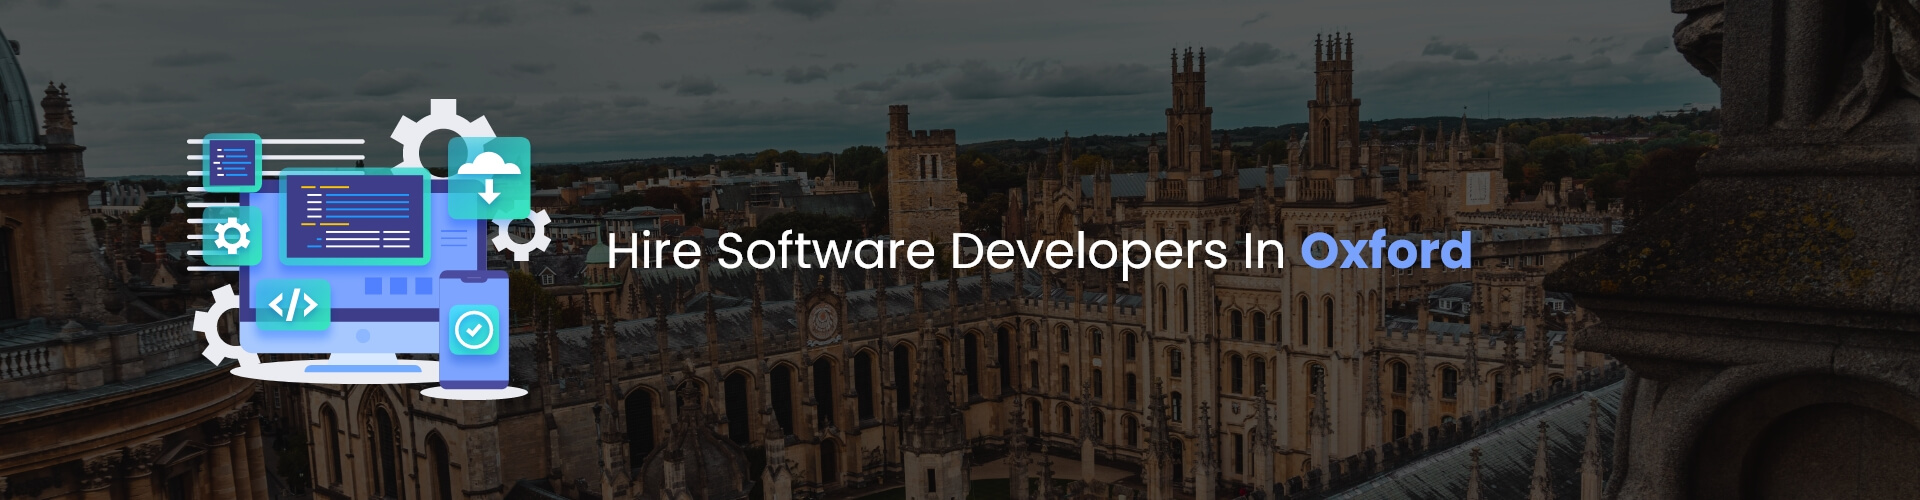 hire software developers in oxford